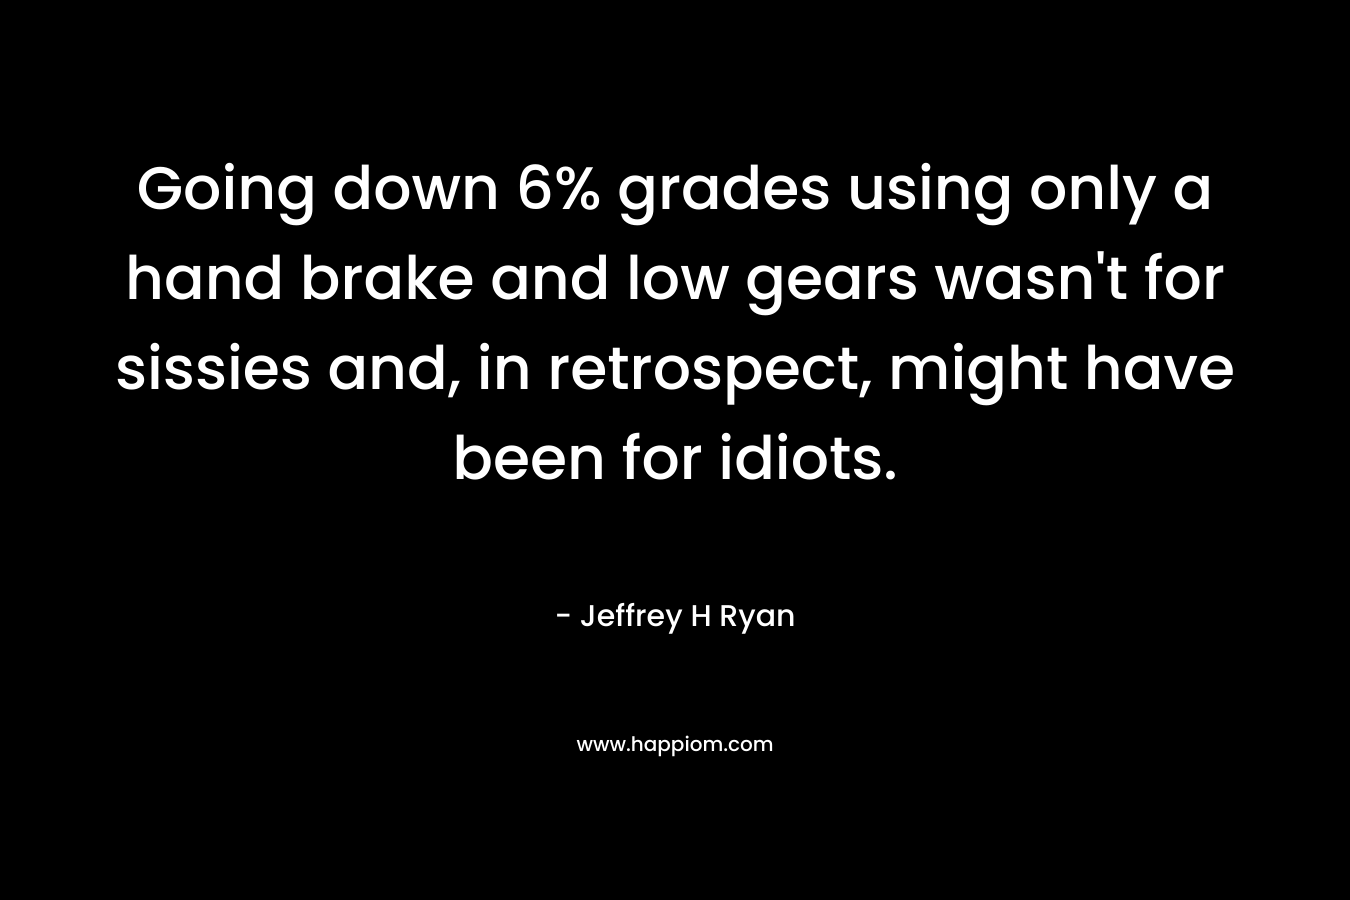 Going down 6% grades using only a hand brake and low gears wasn’t for sissies and, in retrospect, might have been for idiots. – Jeffrey H Ryan